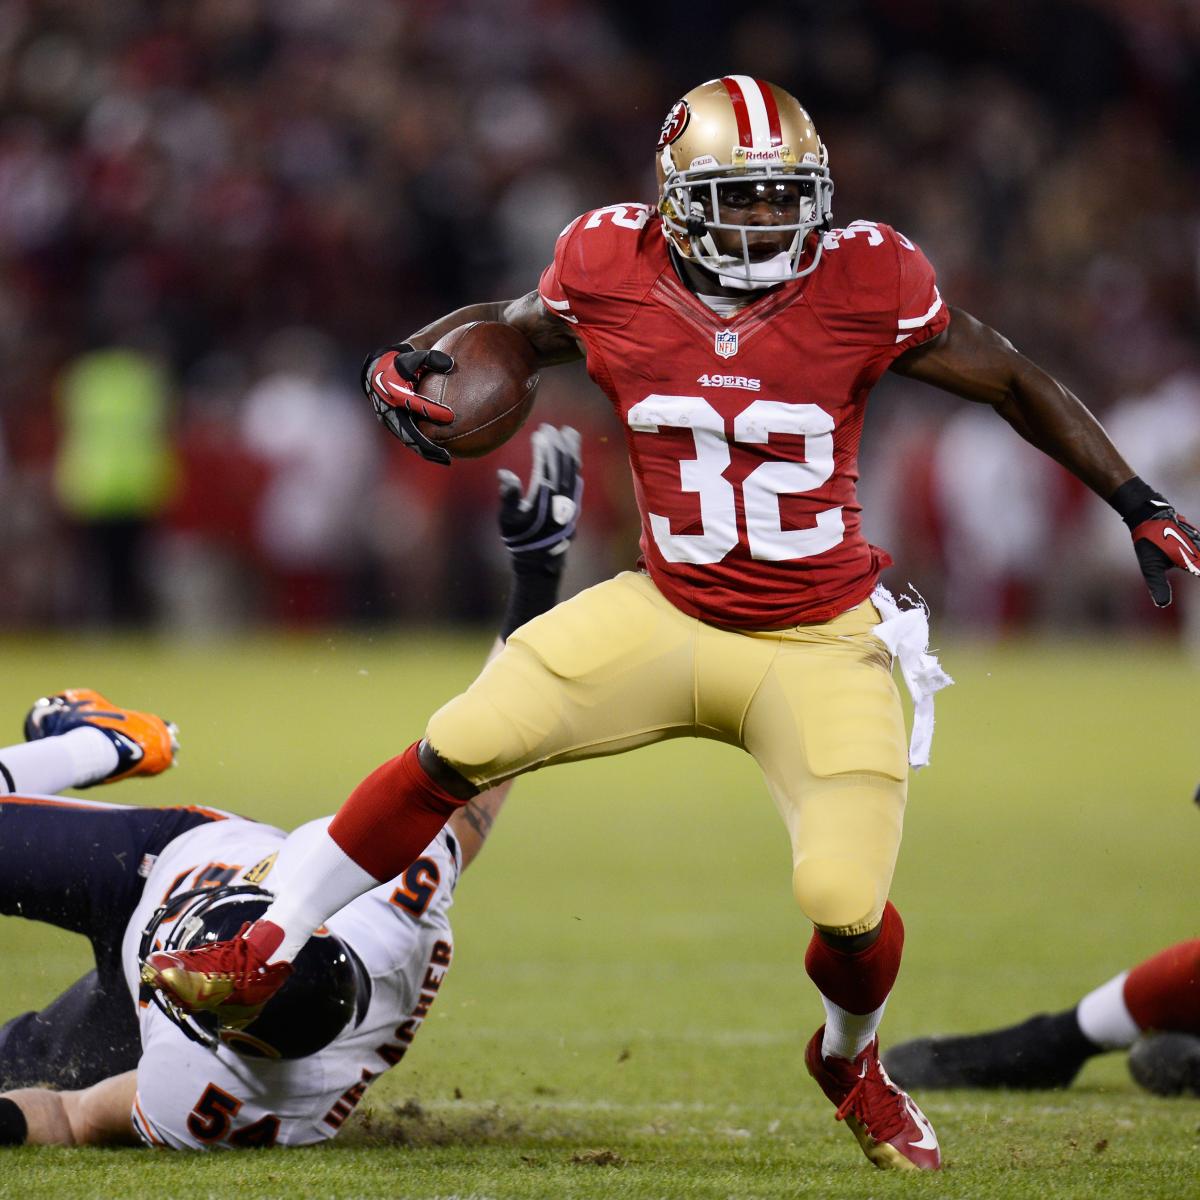 Kendall Hunter Injury: Updates on 49ers RB's Achilles Injury | Bleacher Report